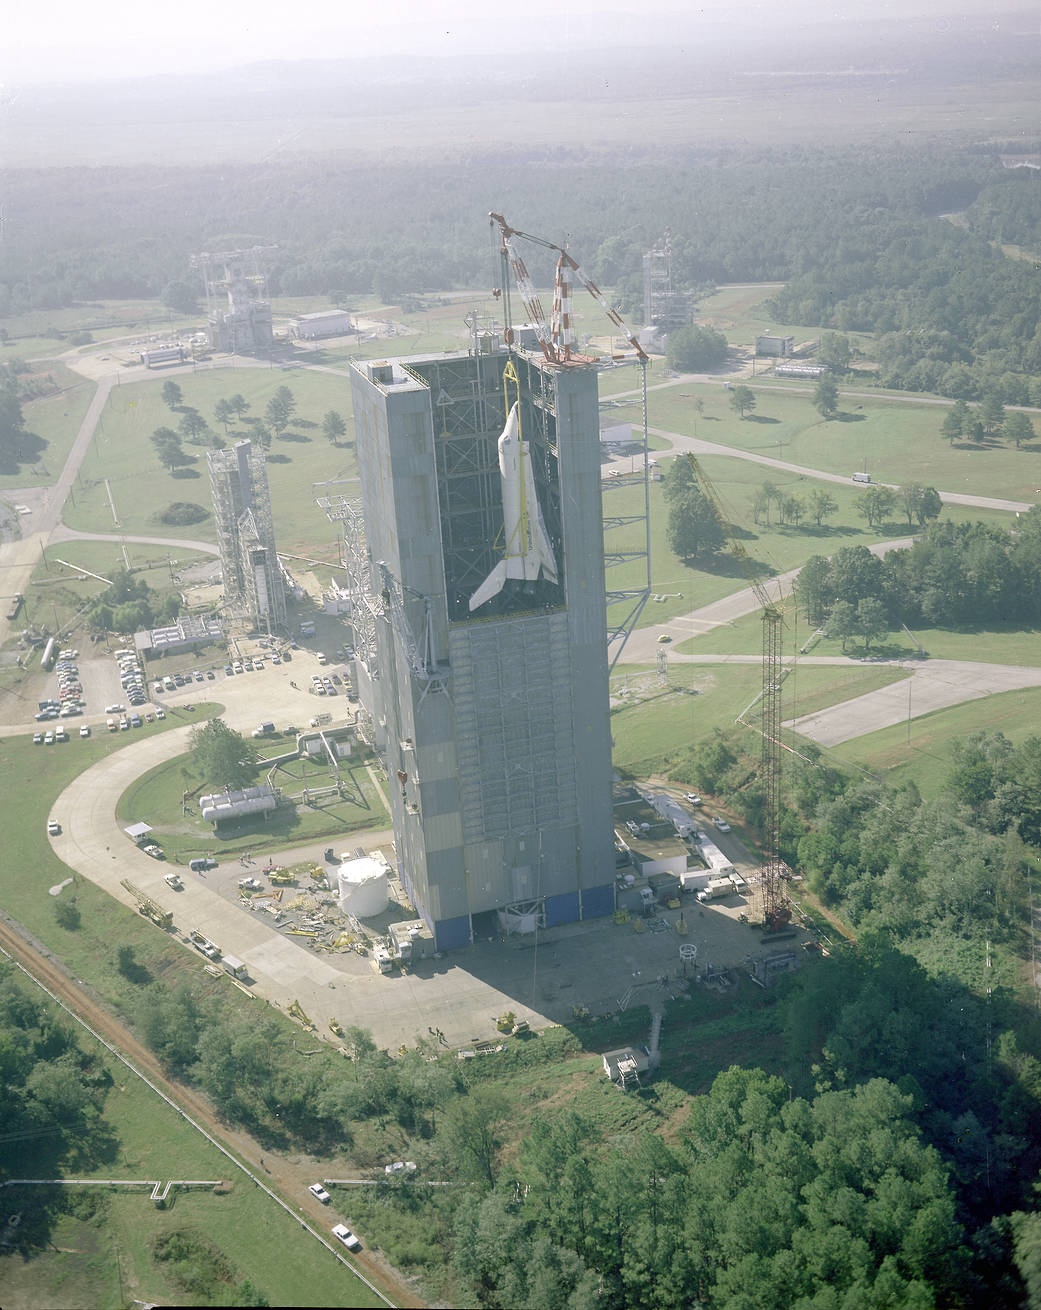 Enterprise Lifted Into Dynamic Test Stand